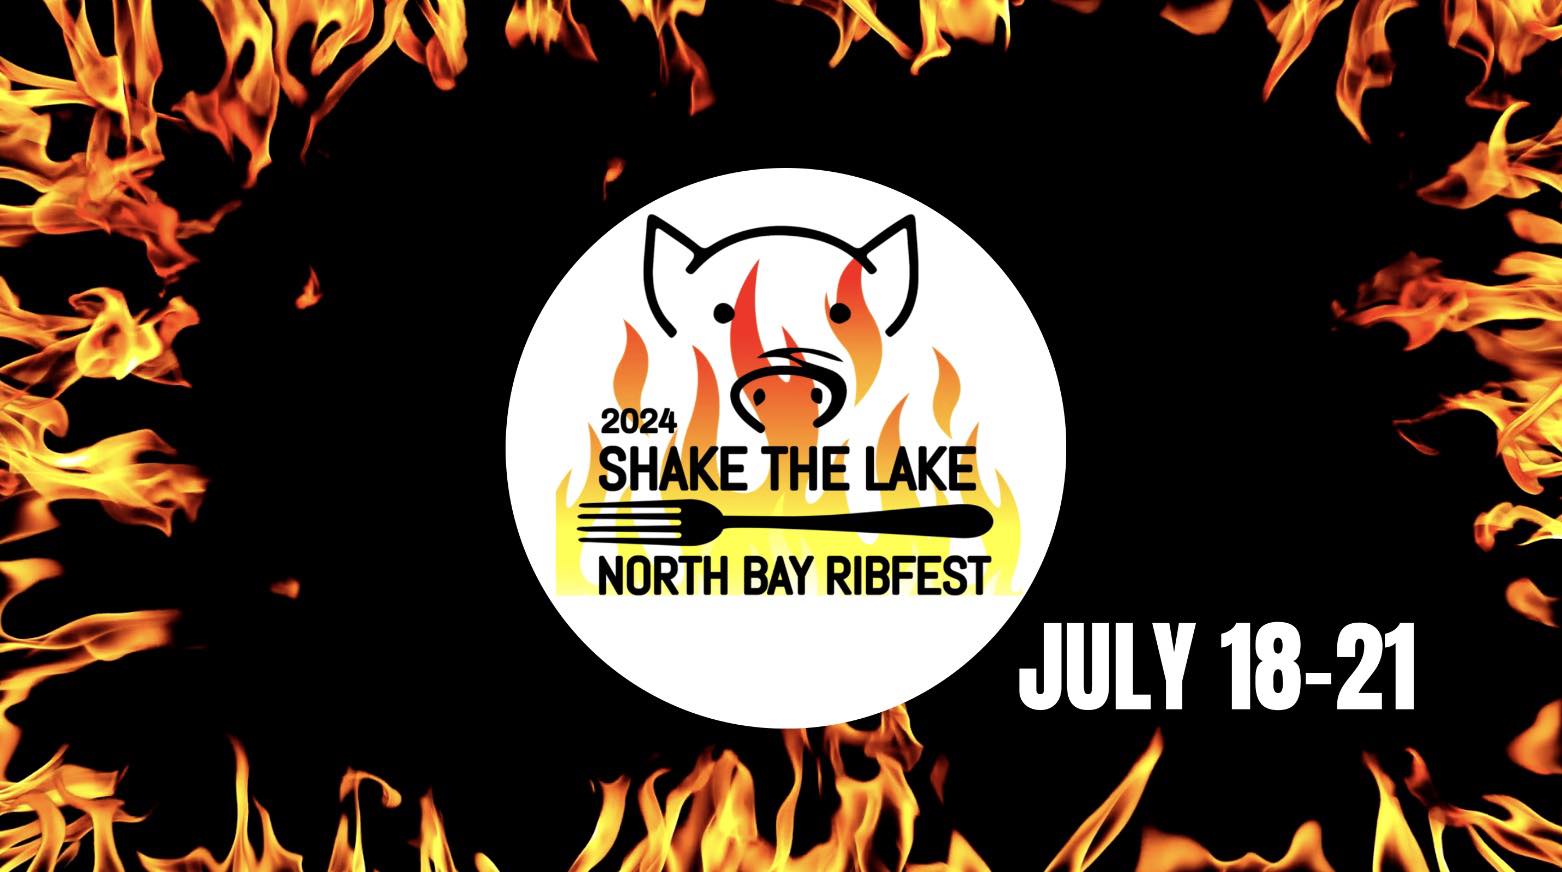 A round logo featuring a cute line drawing of a pig's face, orange and yellow flames and a black fork, with the words "2024 Shake the Lake North Bay Ribfest July 18 to 21".